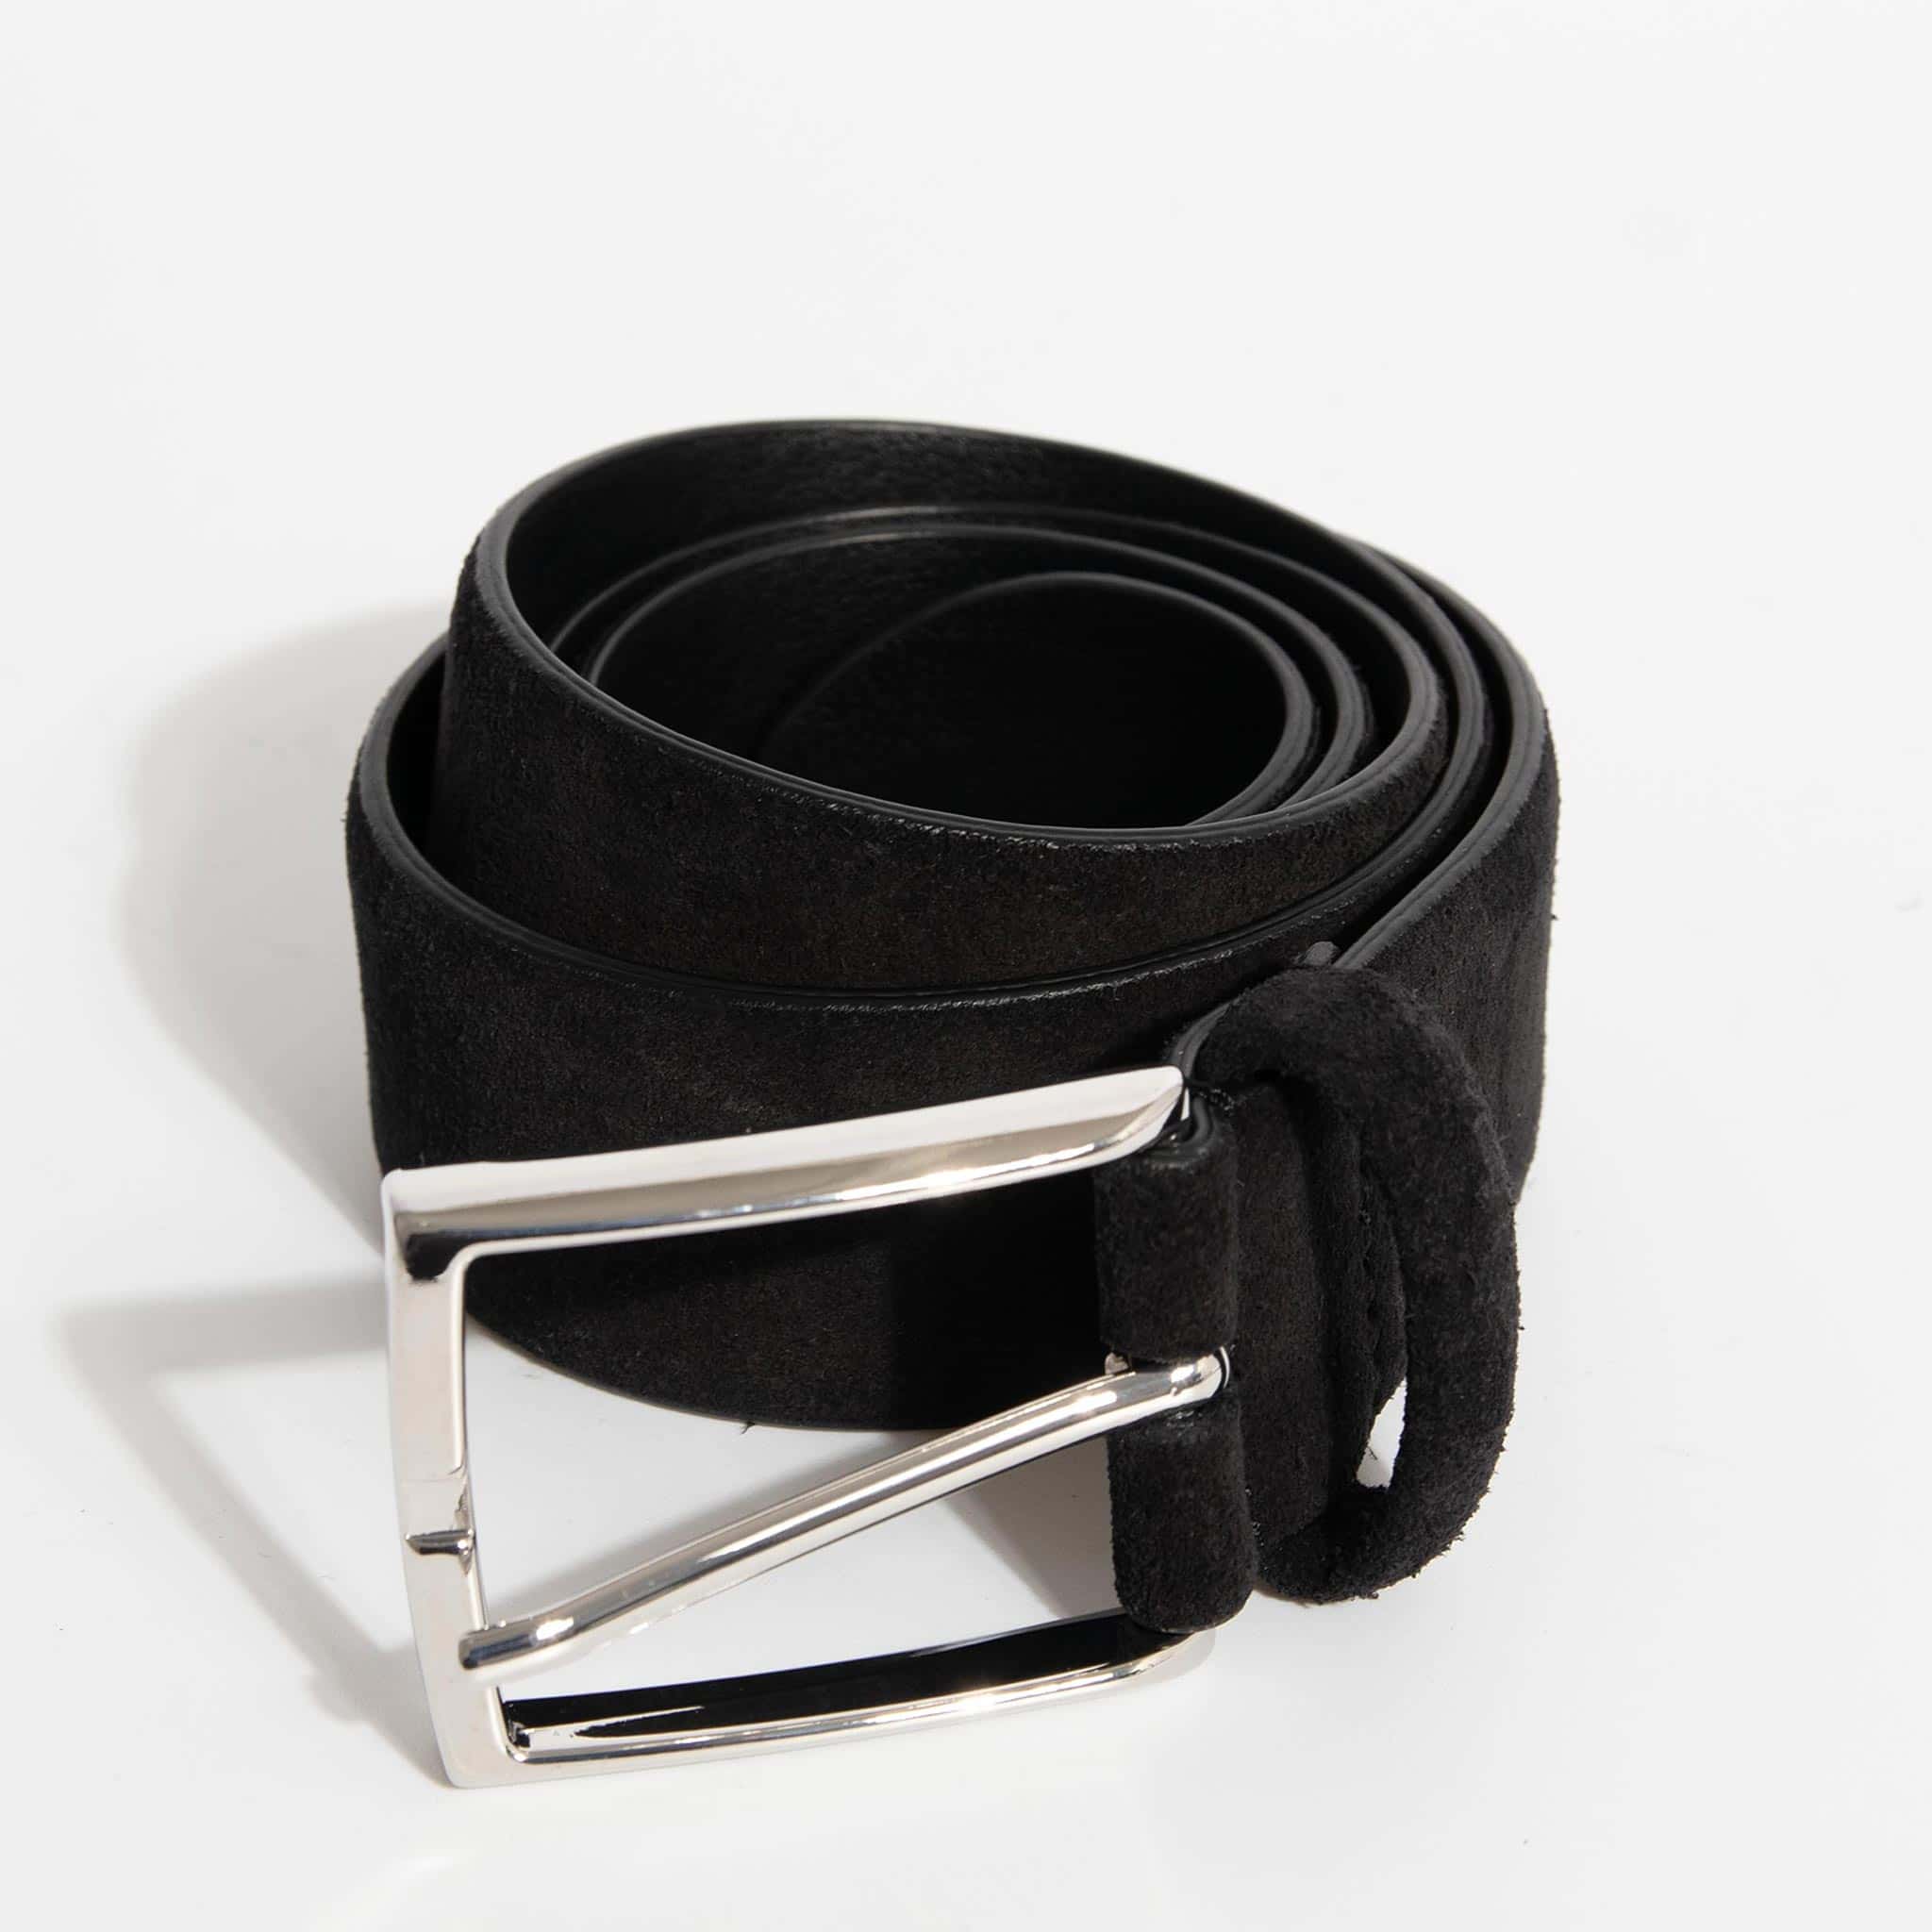 ANDERSONS SUEDE LEATHER SEMI FORMAL BELT A1404